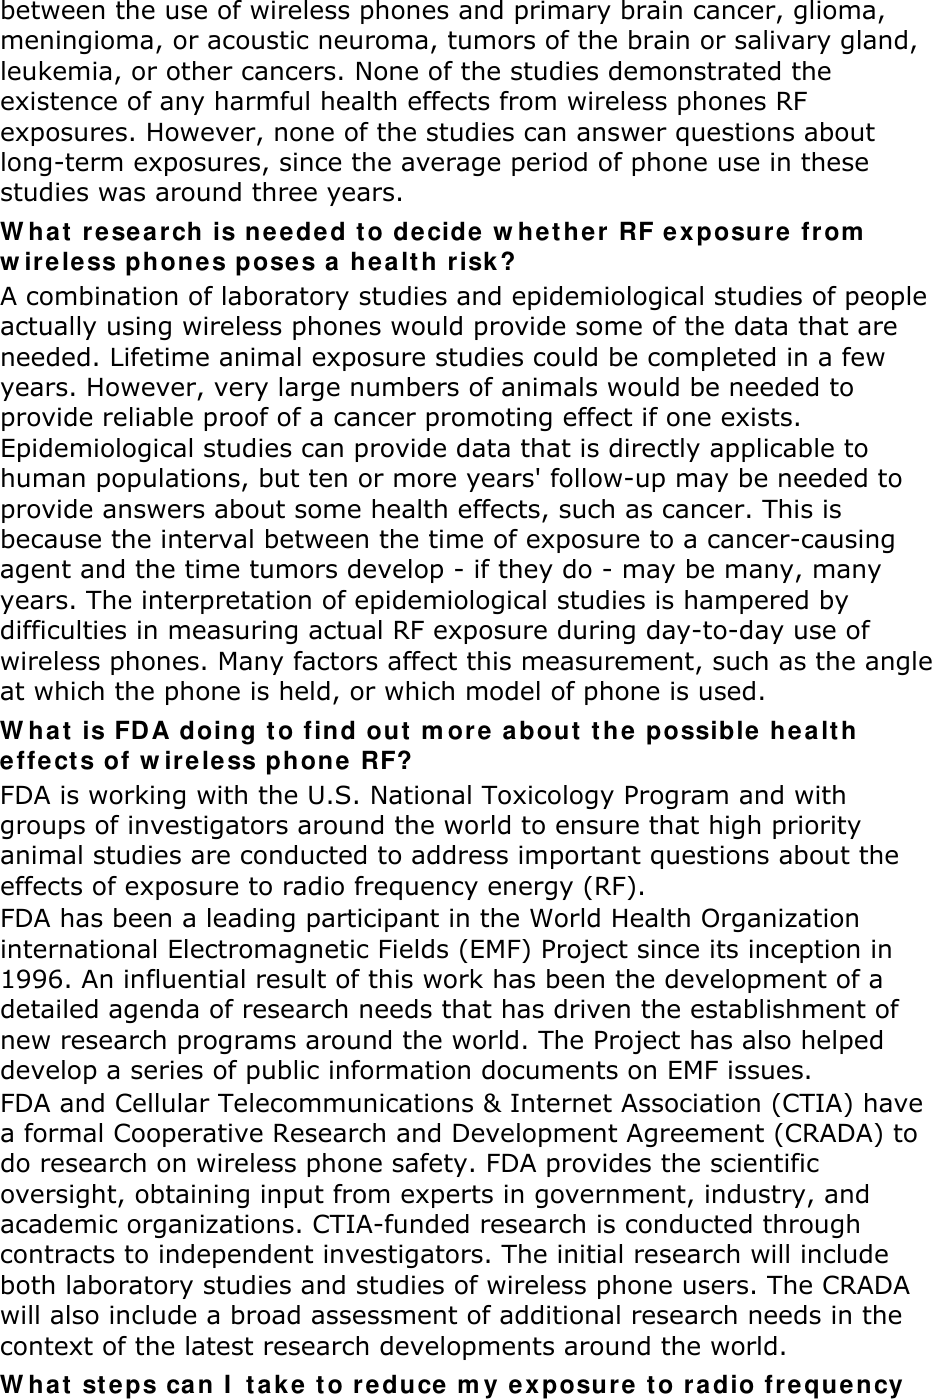 between the use of wireless phones and primary brain cancer, glioma, meningioma, or acoustic neuroma, tumors of the brain or salivary gland, leukemia, or other cancers. None of the studies demonstrated the existence of any harmful health effects from wireless phones RF exposures. However, none of the studies can answer questions about long-term exposures, since the average period of phone use in these studies was around three years. W hat  re se arch is needed t o decide w het her RF exposure from  w ire le ss phone s poses a hea lt h risk ? A combination of laboratory studies and epidemiological studies of people actually using wireless phones would provide some of the data that are needed. Lifetime animal exposure studies could be completed in a few years. However, very large numbers of animals would be needed to provide reliable proof of a cancer promoting effect if one exists. Epidemiological studies can provide data that is directly applicable to human populations, but ten or more years&apos; follow-up may be needed to provide answers about some health effects, such as cancer. This is because the interval between the time of exposure to a cancer-causing agent and the time tumors develop - if they do - may be many, many years. The interpretation of epidemiological studies is hampered by difficulties in measuring actual RF exposure during day-to-day use of wireless phones. Many factors affect this measurement, such as the angle at which the phone is held, or which model of phone is used. W hat  is FD A doing to find out  m ore about  t he possible he a lt h effect s of w ire less phone  RF? FDA is working with the U.S. National Toxicology Program and with groups of investigators around the world to ensure that high priority animal studies are conducted to address important questions about the effects of exposure to radio frequency energy (RF). FDA has been a leading participant in the World Health Organization international Electromagnetic Fields (EMF) Project since its inception in 1996. An influential result of this work has been the development of a detailed agenda of research needs that has driven the establishment of new research programs around the world. The Project has also helped develop a series of public information documents on EMF issues. FDA and Cellular Telecommunications &amp; Internet Association (CTIA) have a formal Cooperative Research and Development Agreement (CRADA) to do research on wireless phone safety. FDA provides the scientific oversight, obtaining input from experts in government, industry, and academic organizations. CTIA-funded research is conducted through contracts to independent investigators. The initial research will include both laboratory studies and studies of wireless phone users. The CRADA will also include a broad assessment of additional research needs in the context of the latest research developments around the world. W hat  st e ps ca n I  t a ke  t o re duce m y exposur e  to ra dio fre que ncy 